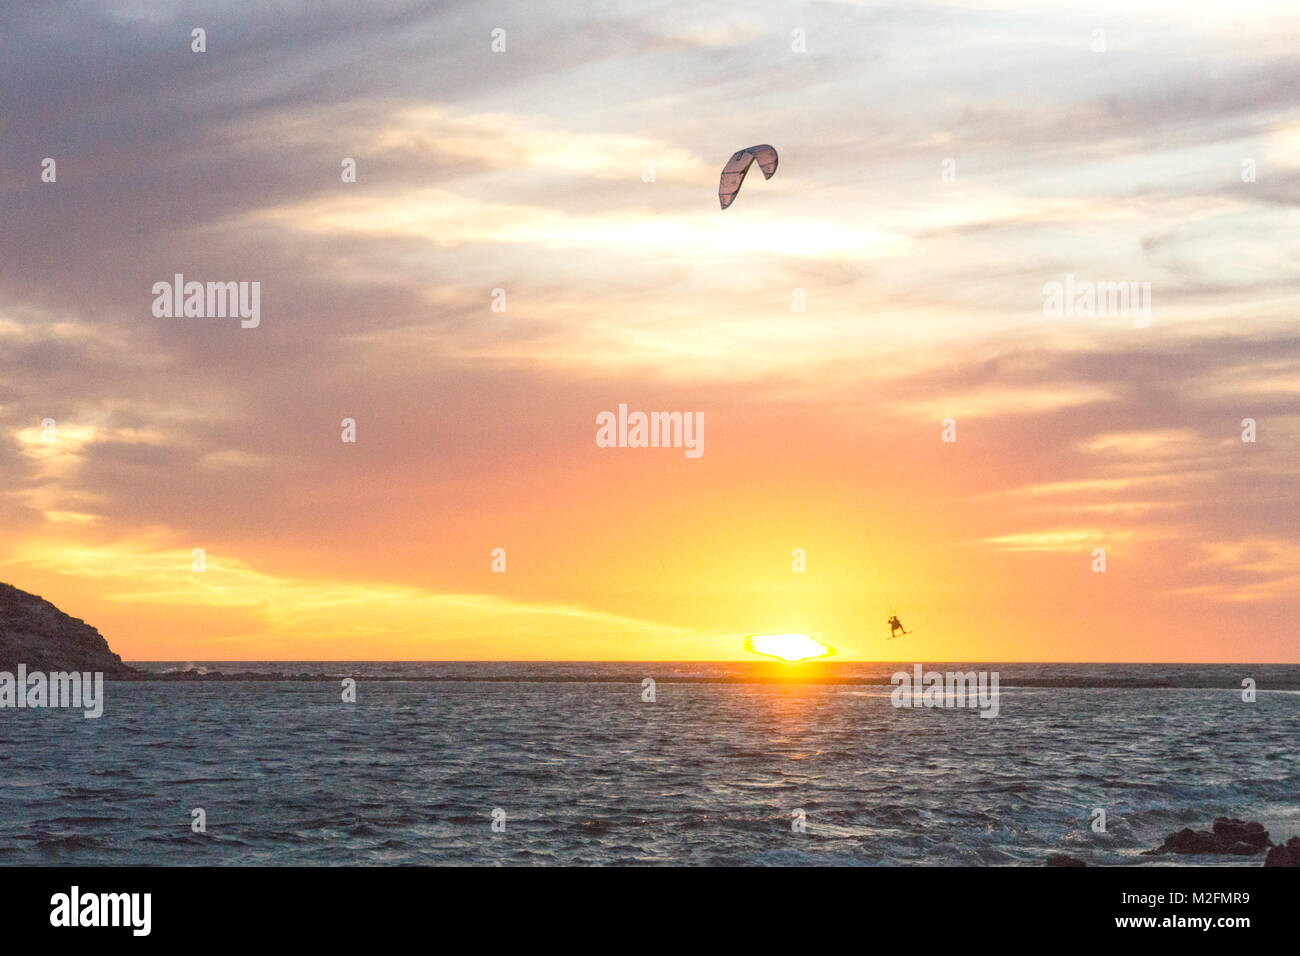 San Carlos, Sonora State, Mexico, February 7, 2018; at sunset on a chilly evening parasurfer rises gracefully above the cold blue Sea of Cortez while turning into the wind & is silhouetted briefly against the sun falling below the horizon before drifting down to the surface of the water & doing it again Credit: Dorothy Alexander/Alamy Live News Stock Photo